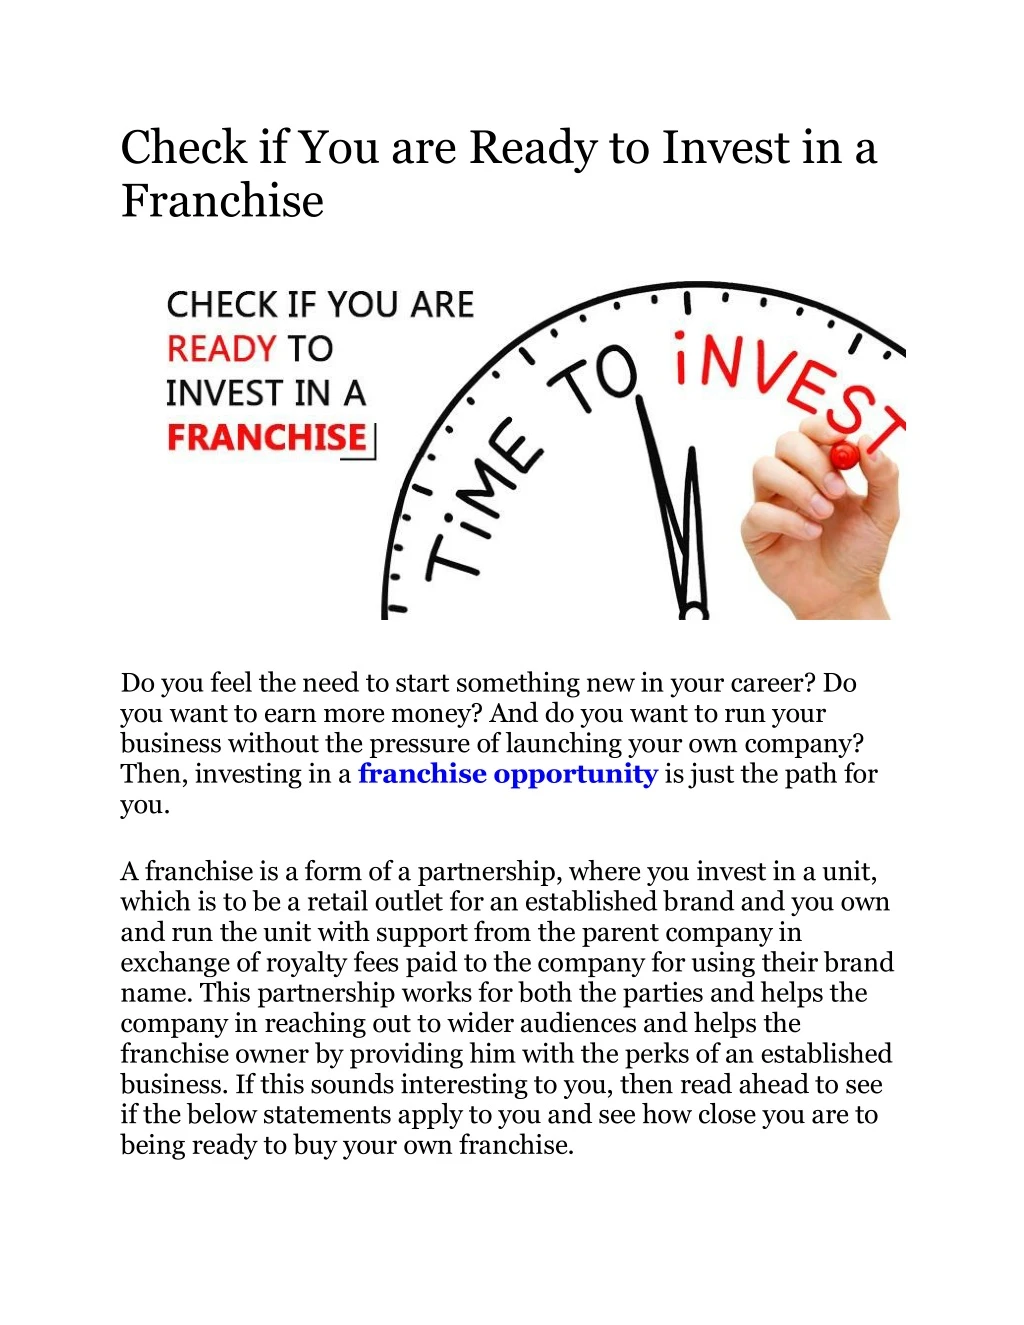 check if you are ready to invest in a franchise